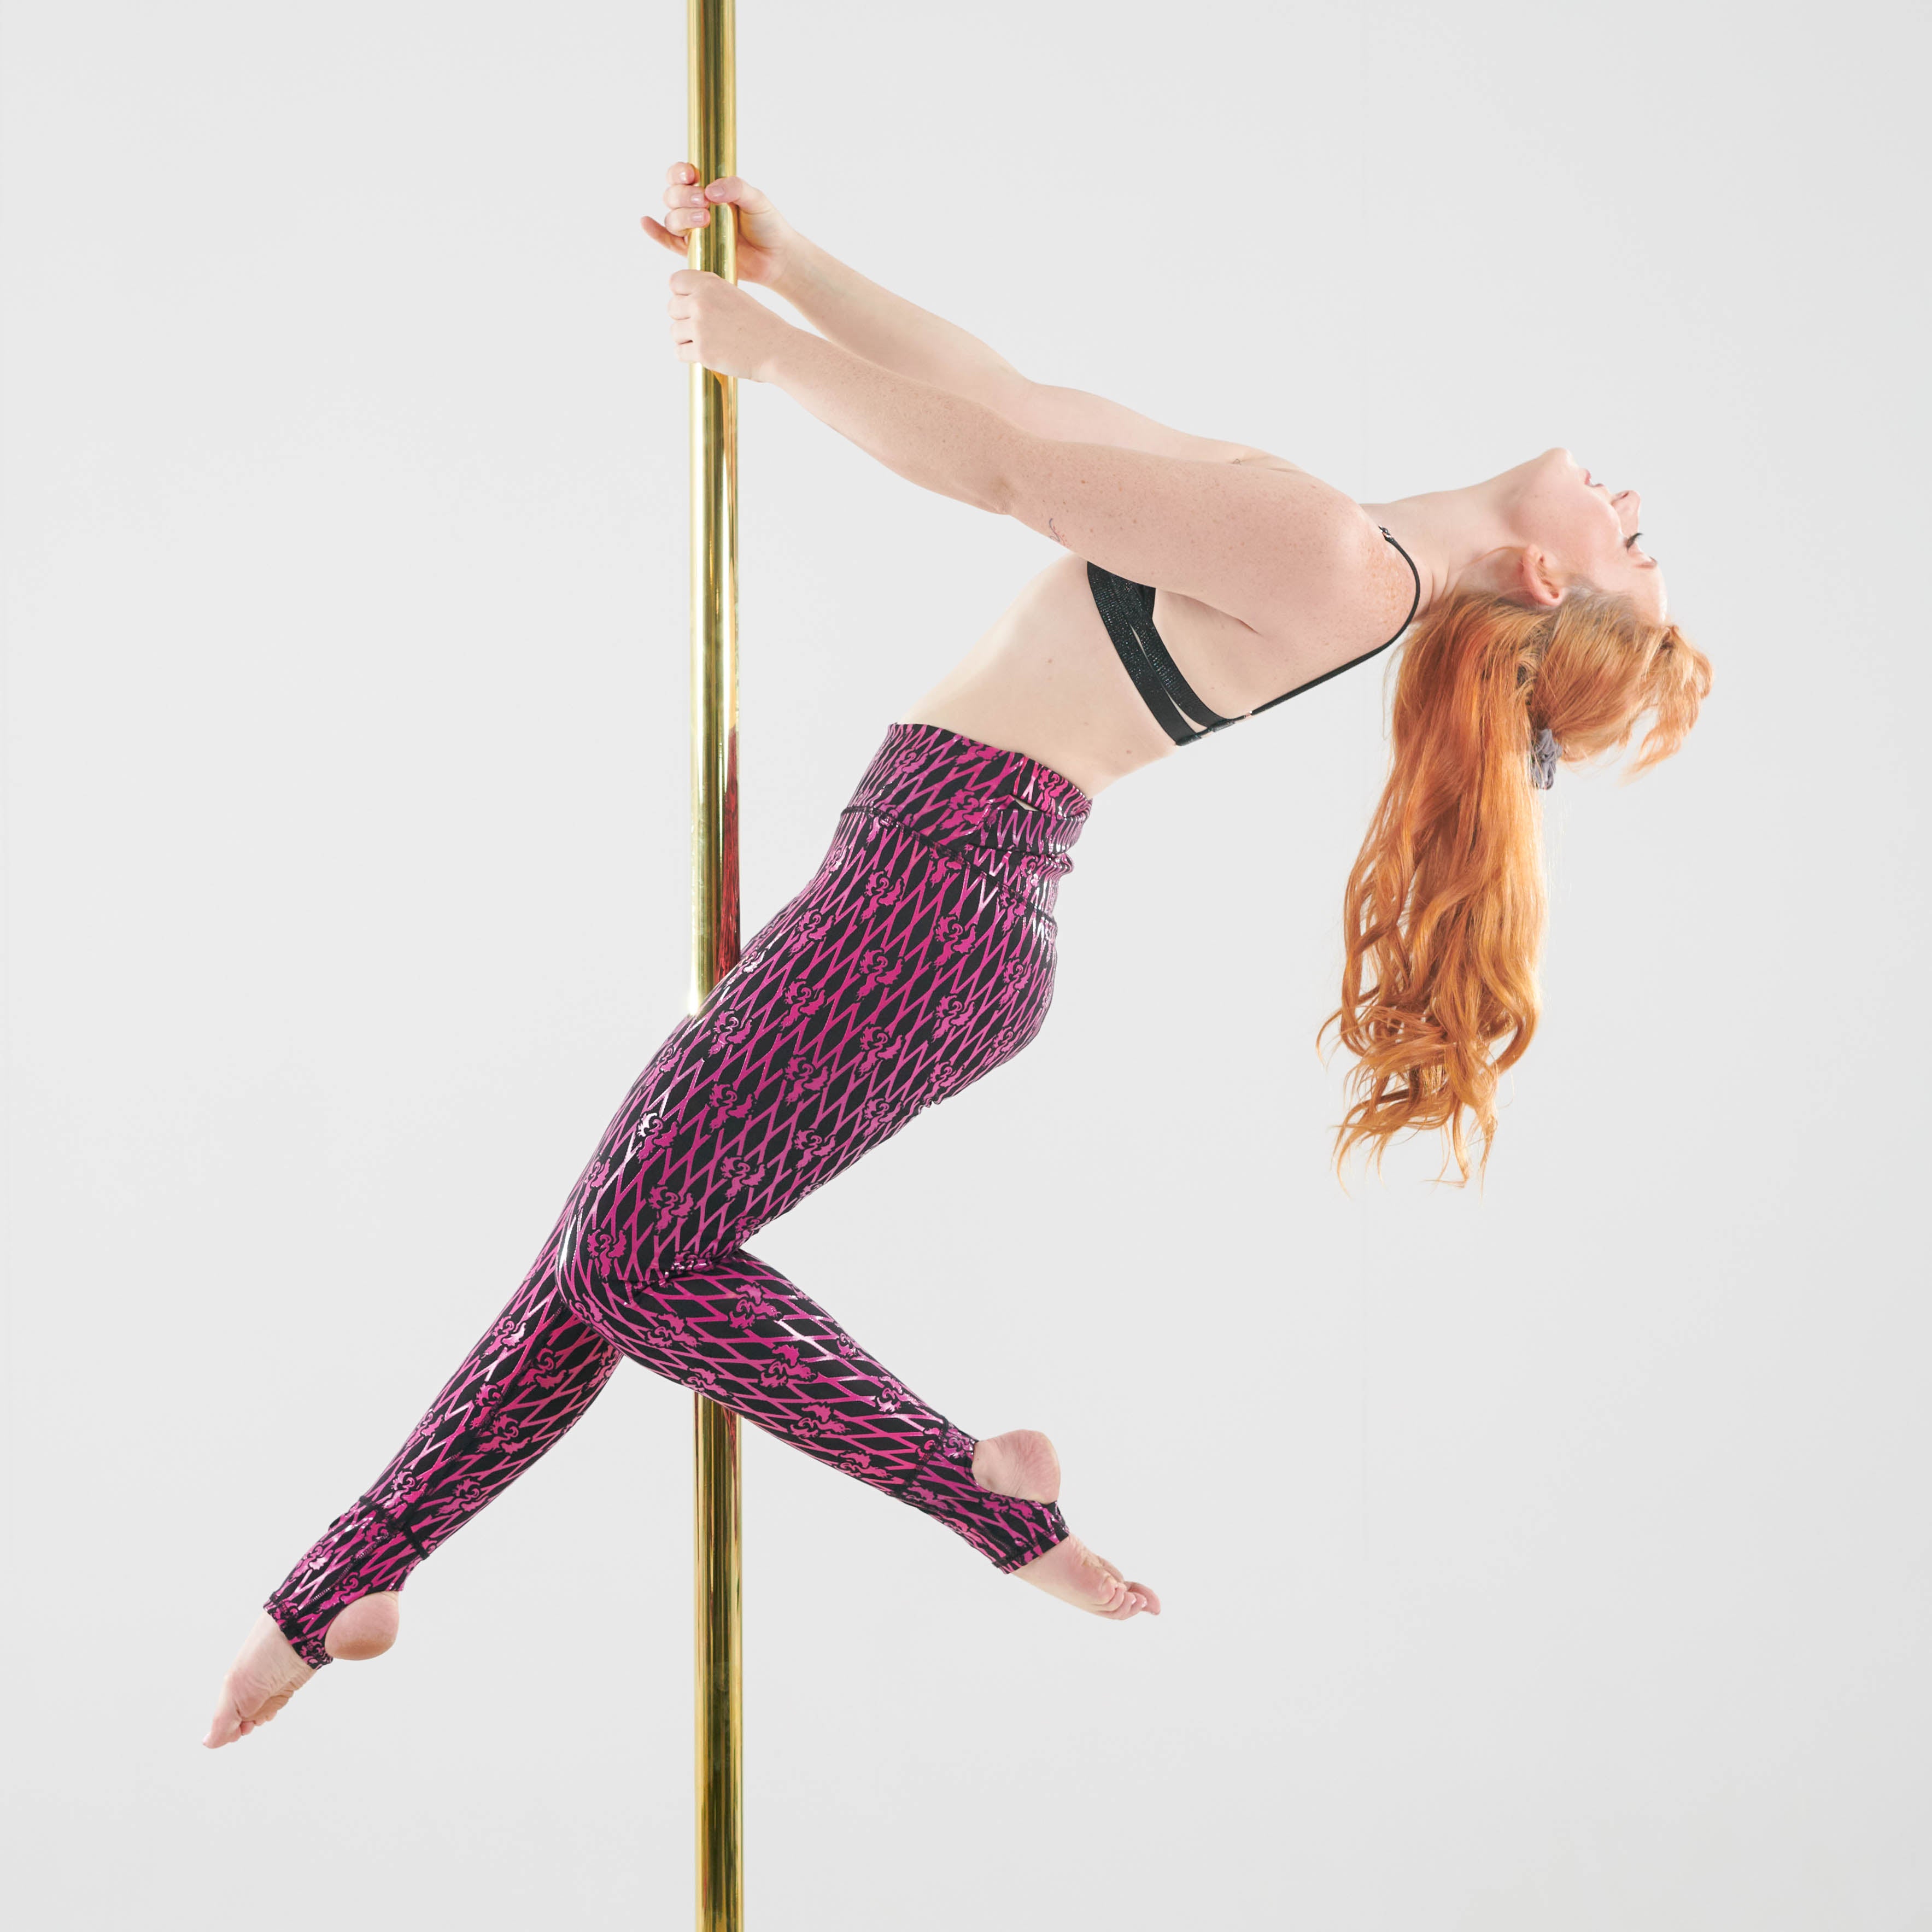 5 Reasons To Start Pole Dancing (Even if You're 50+) - Super Fly Honey  Sticky Pole Wear